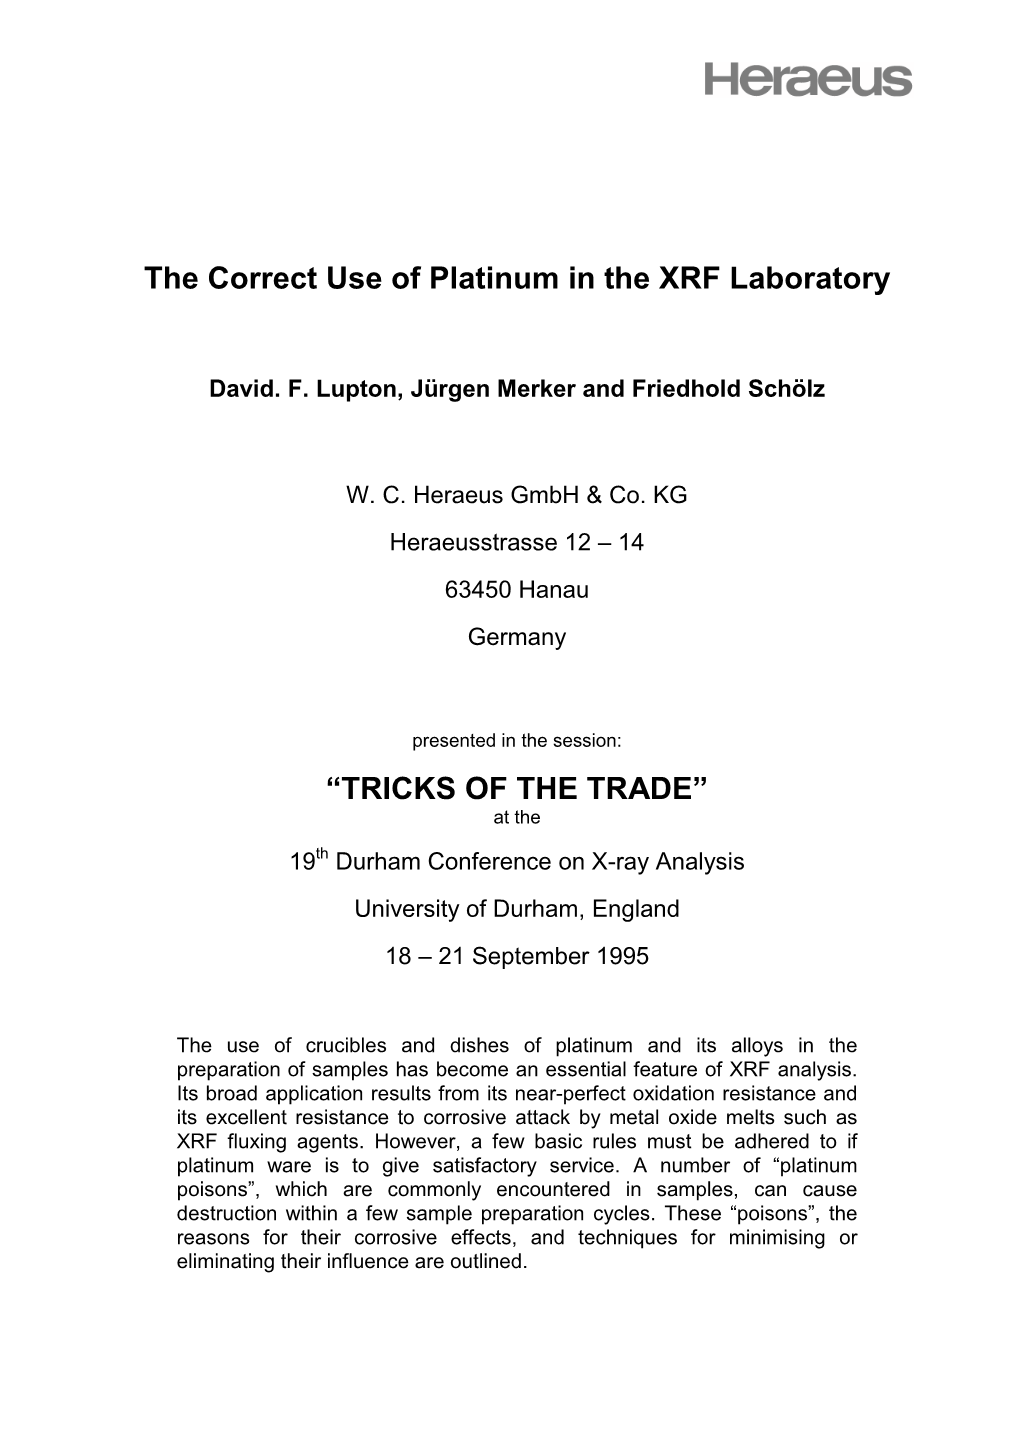 The Correct Use of Platinum in the XRF Laboratory